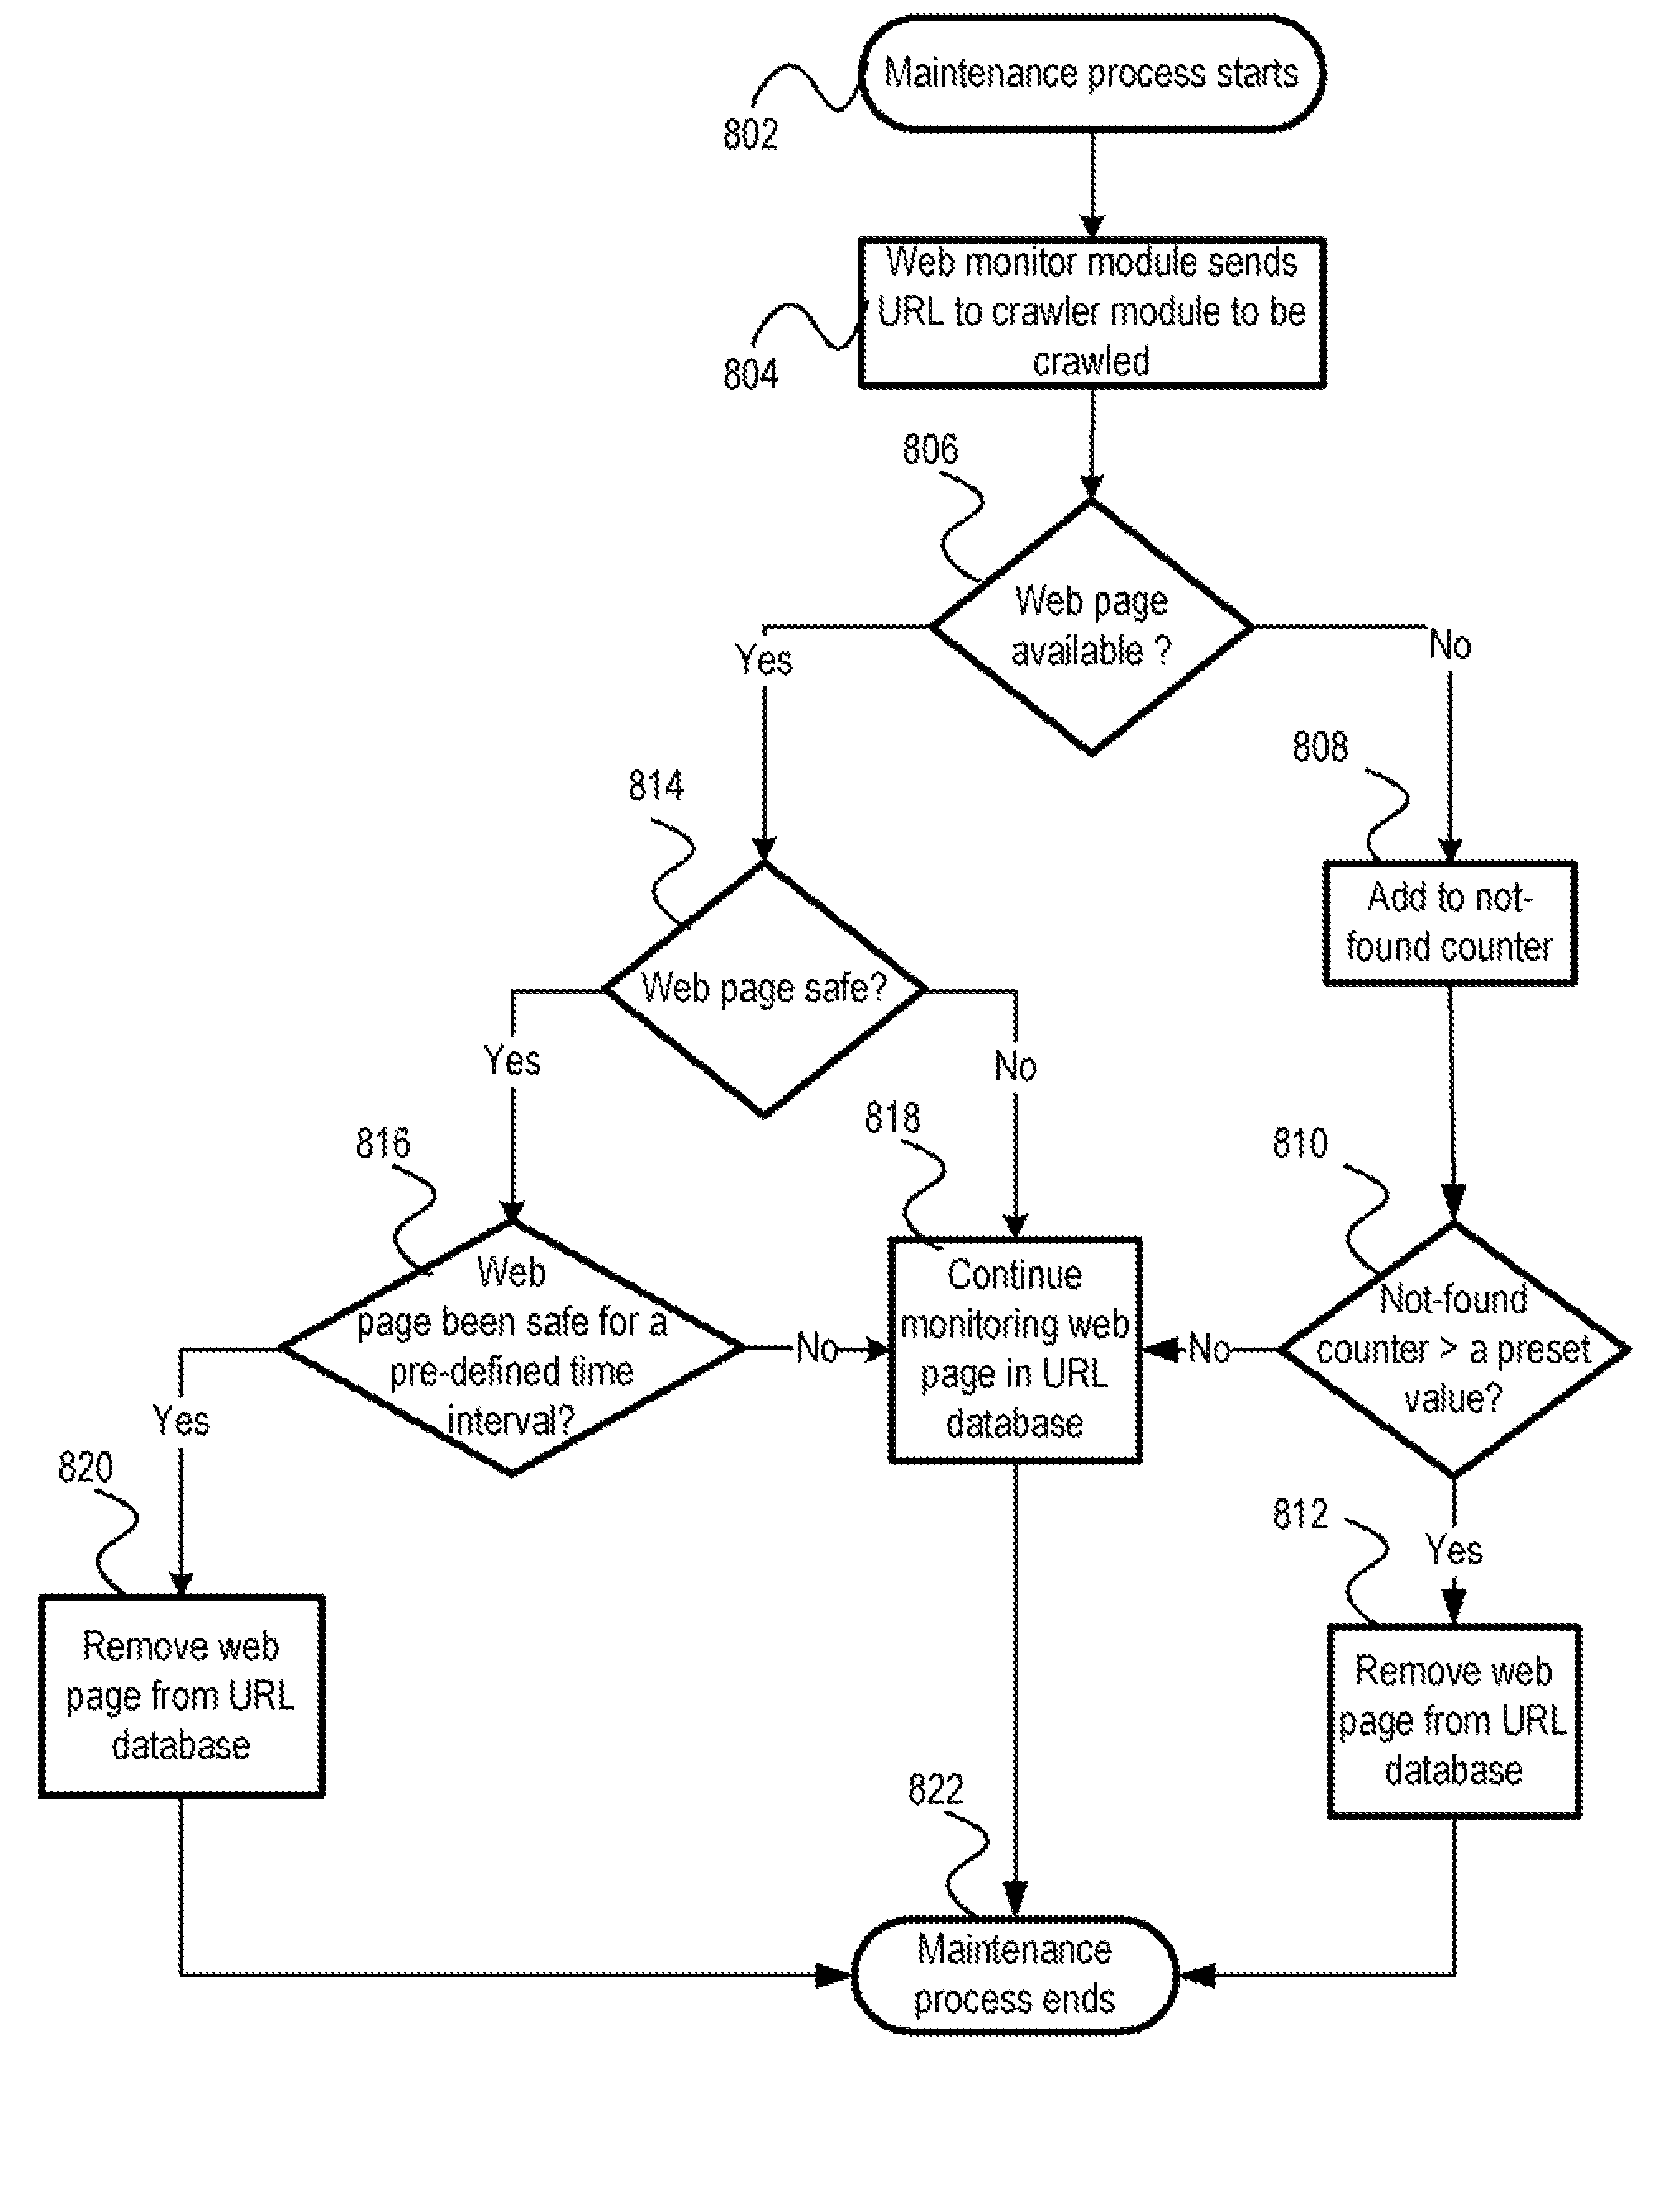 Methods and arrangement for active malicious web pages discovery